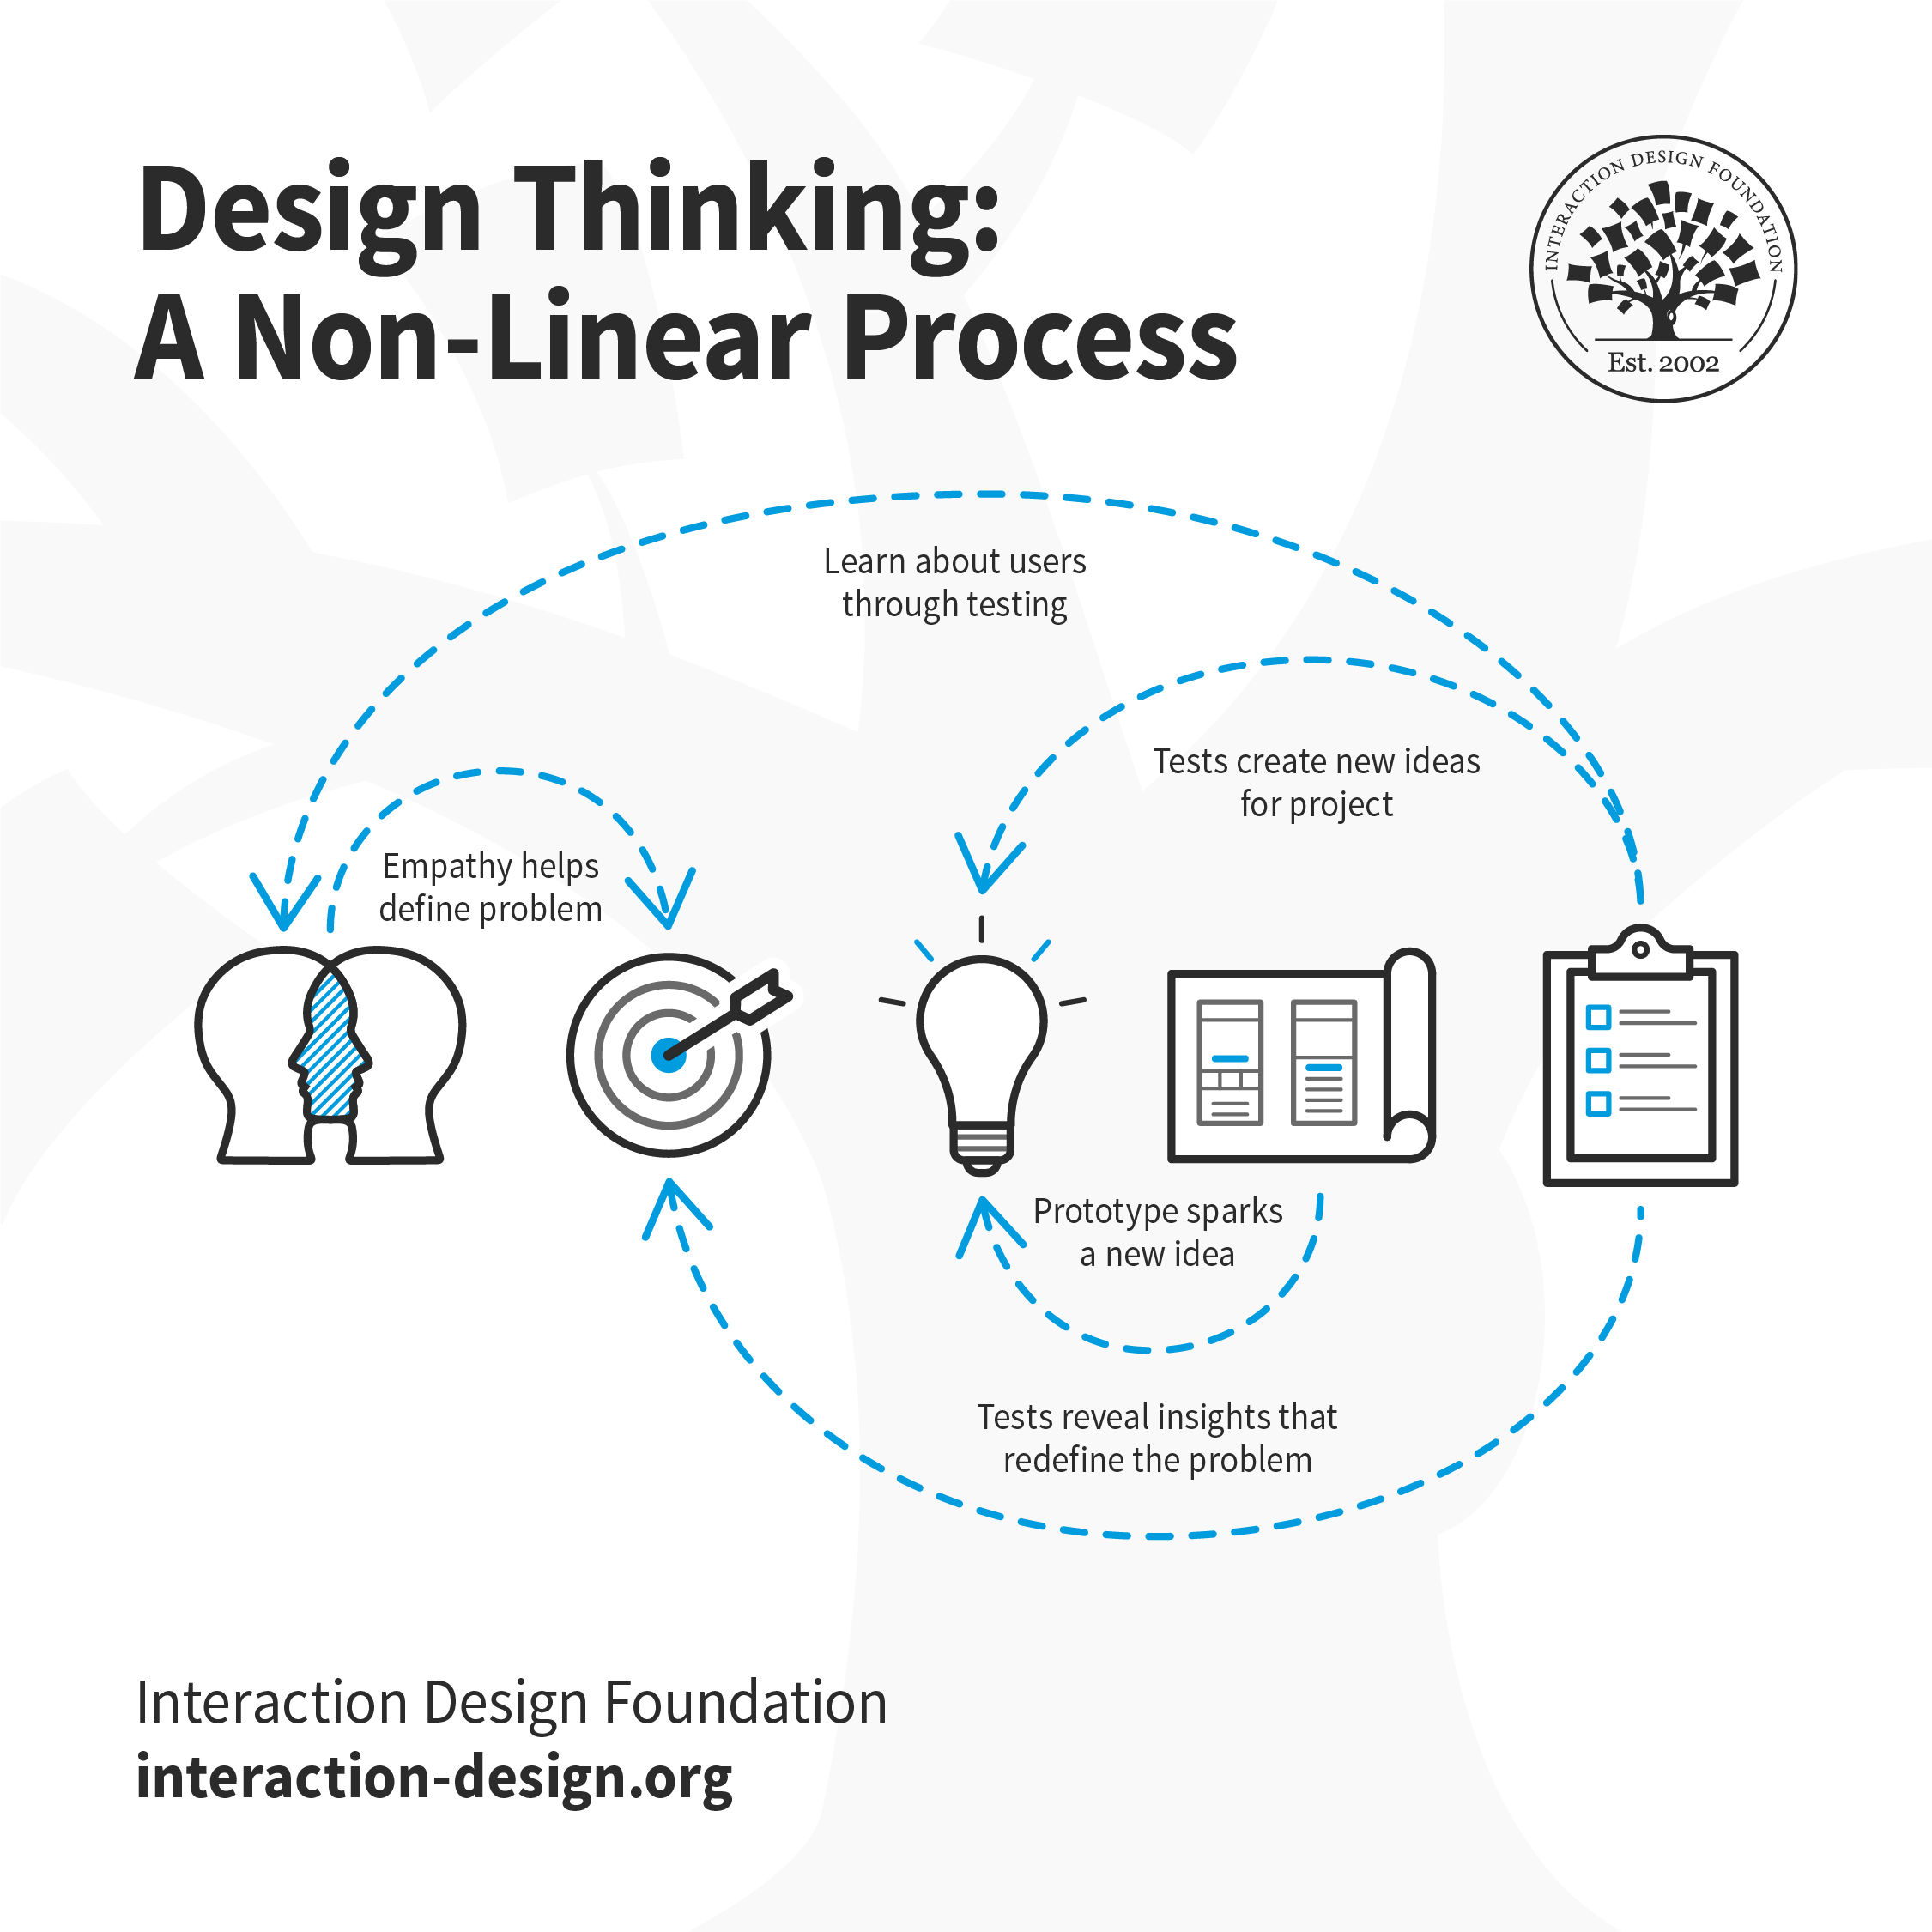 Design Thinking: A Non-Linear process. Empathy helps define problem, Prototype sparks a new idea, tests reveal insights that redefine the problem, tests create new ideas for project, learn about users (empathize) through testing